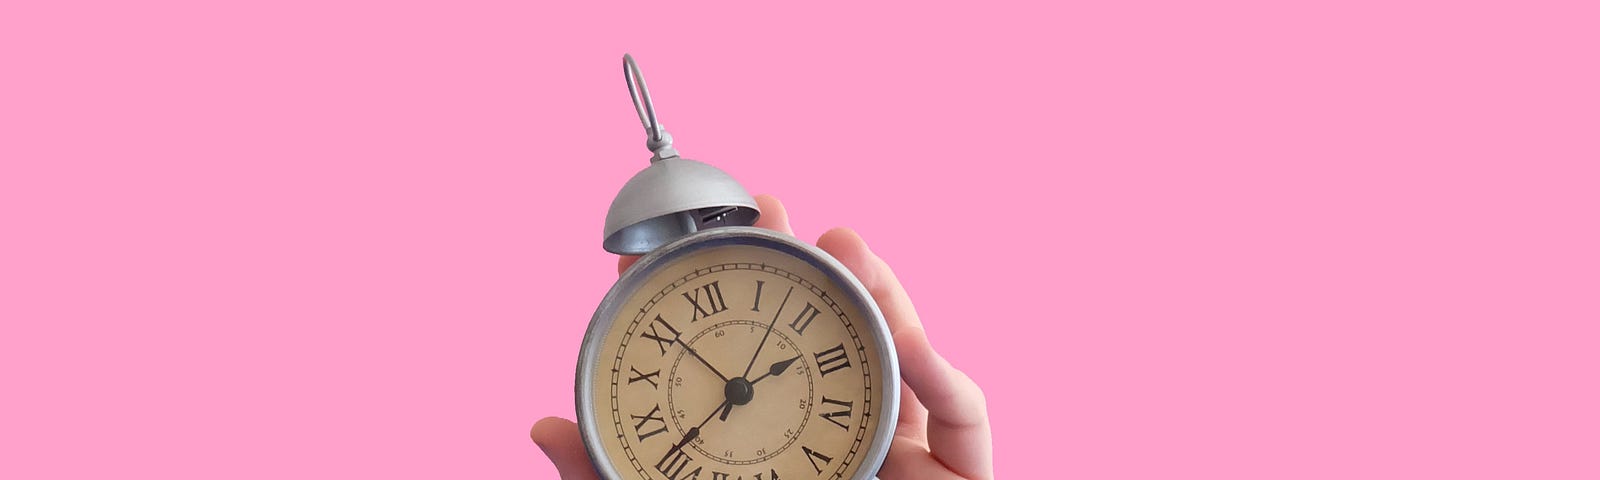 A NEW STUDY SHOWS THAT YOUR GUT CONTENTS INFLUENCE when and how you sleep. Today’s essay is on snooze foods: how to eat your way to a restful night. In the illustration, we see a hand reach up through a hole to hold a small antique alarm clock.